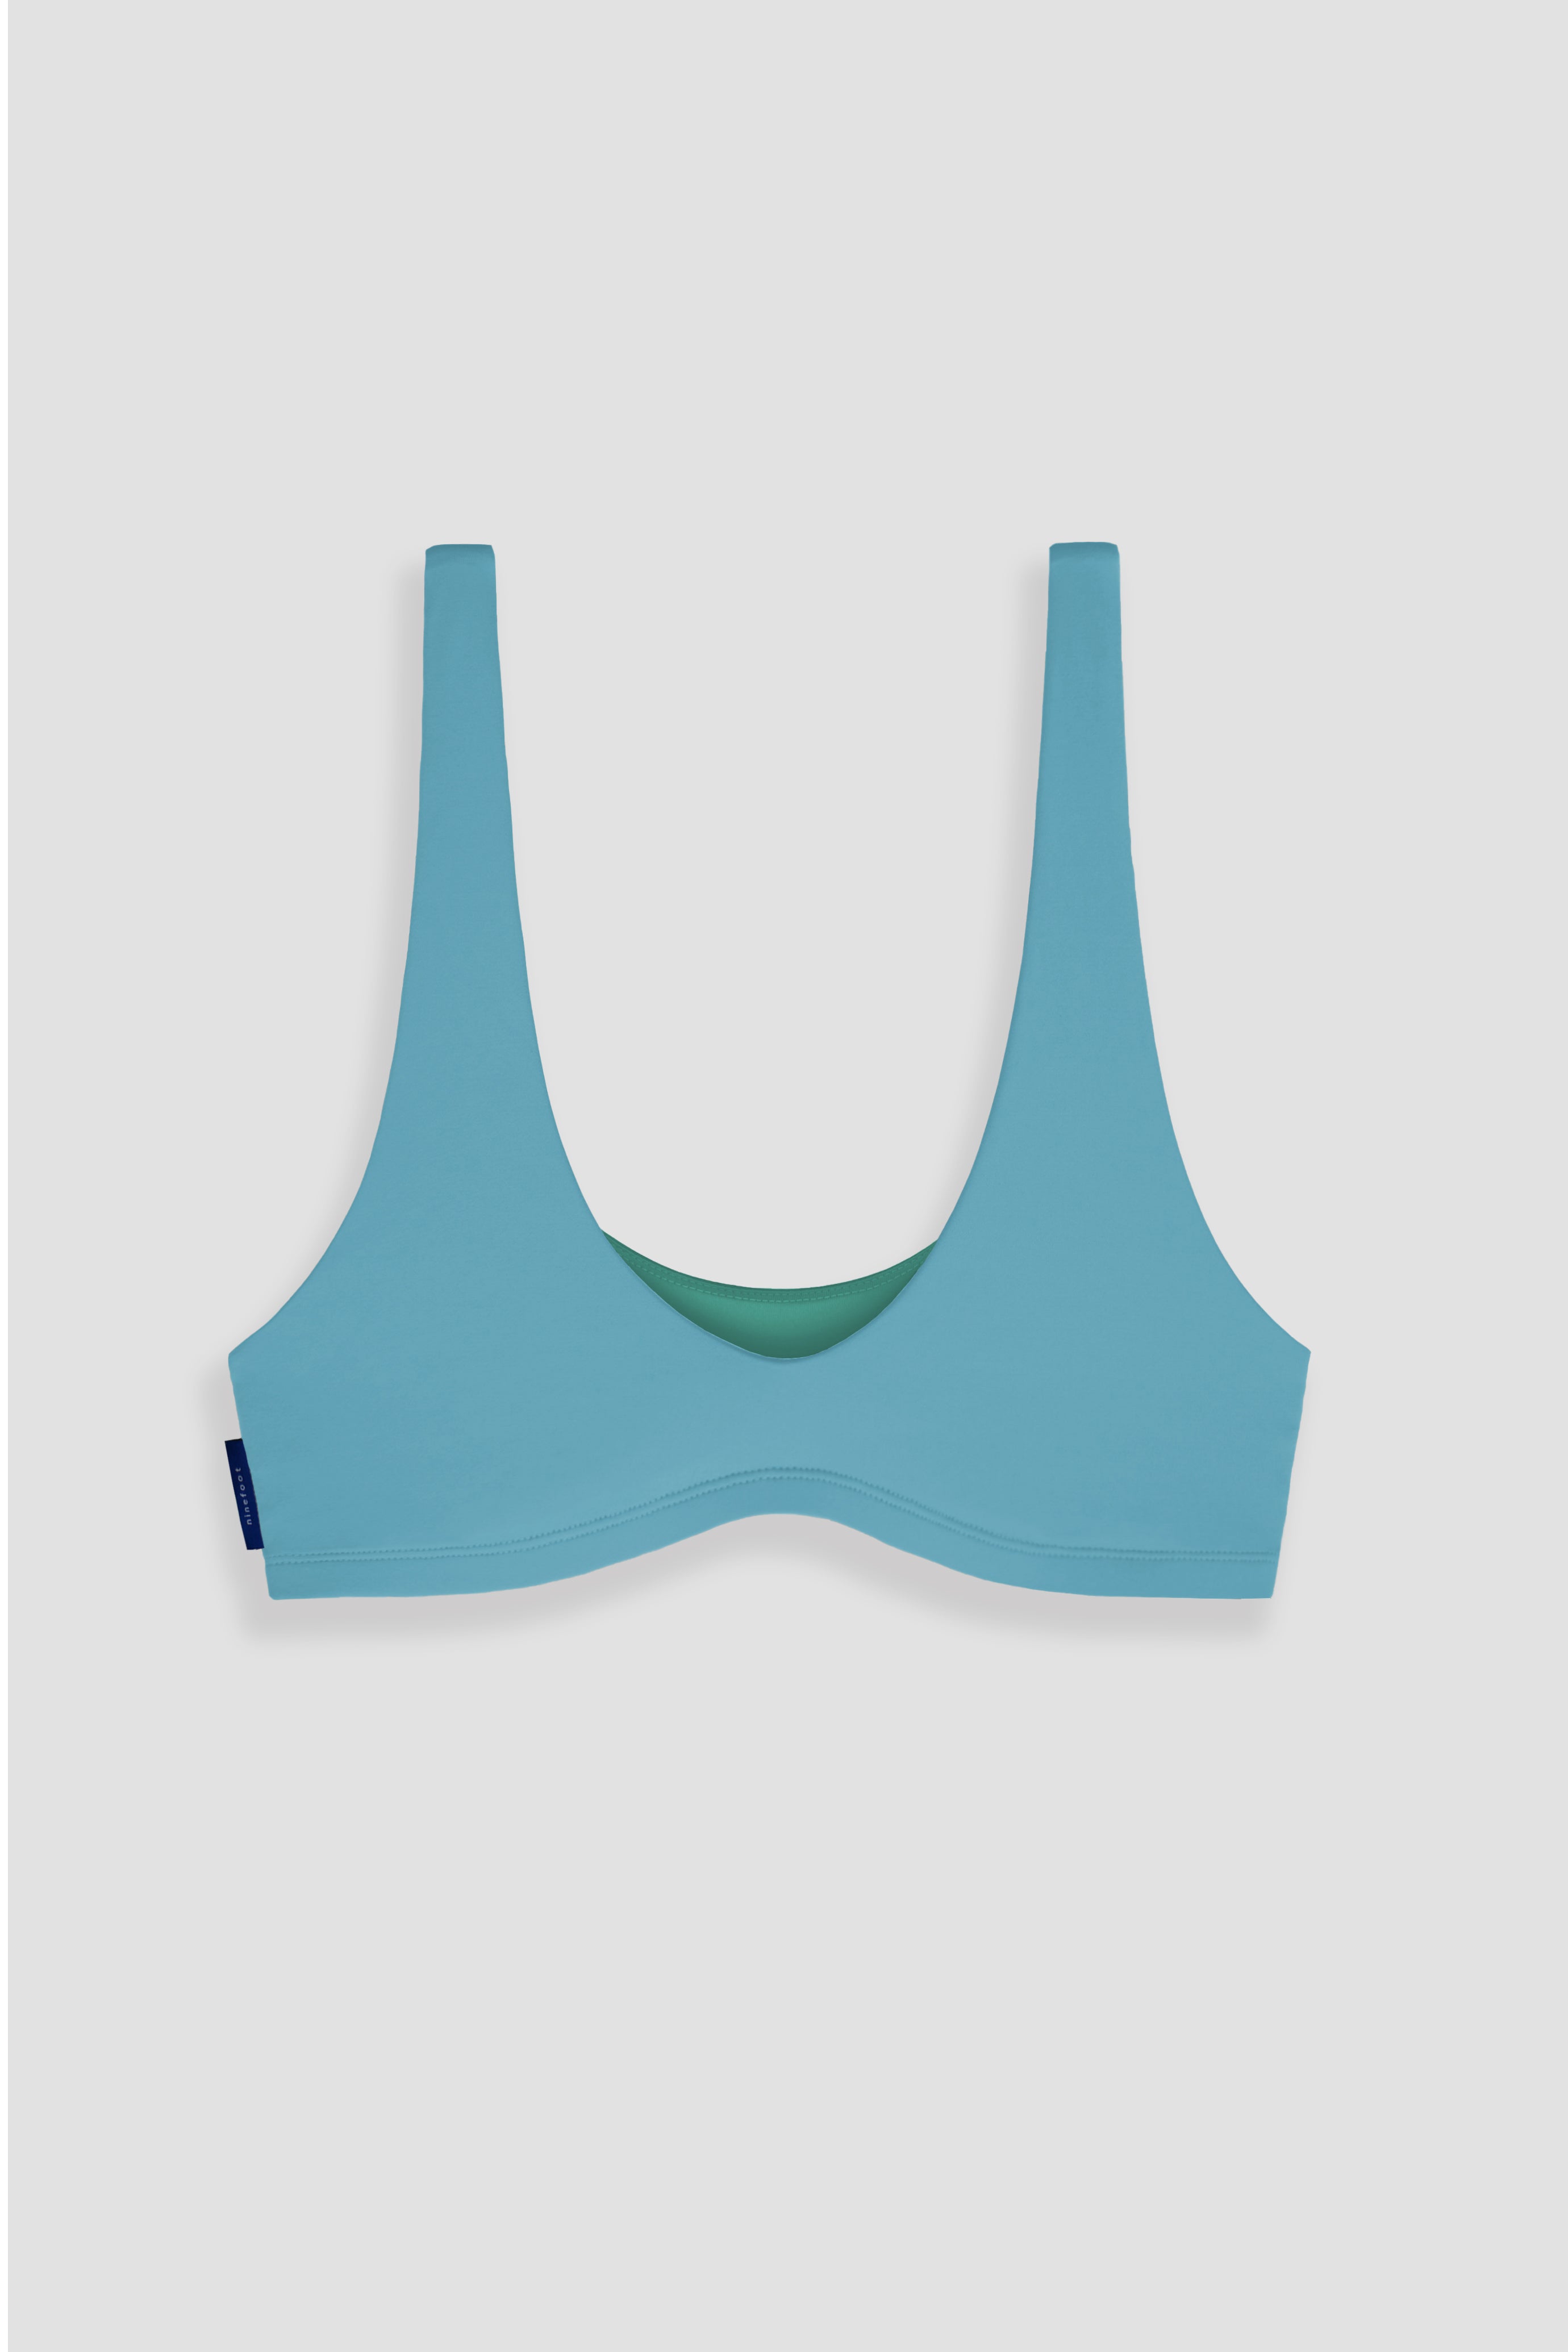 nias surf top in stone blue color flat image front side